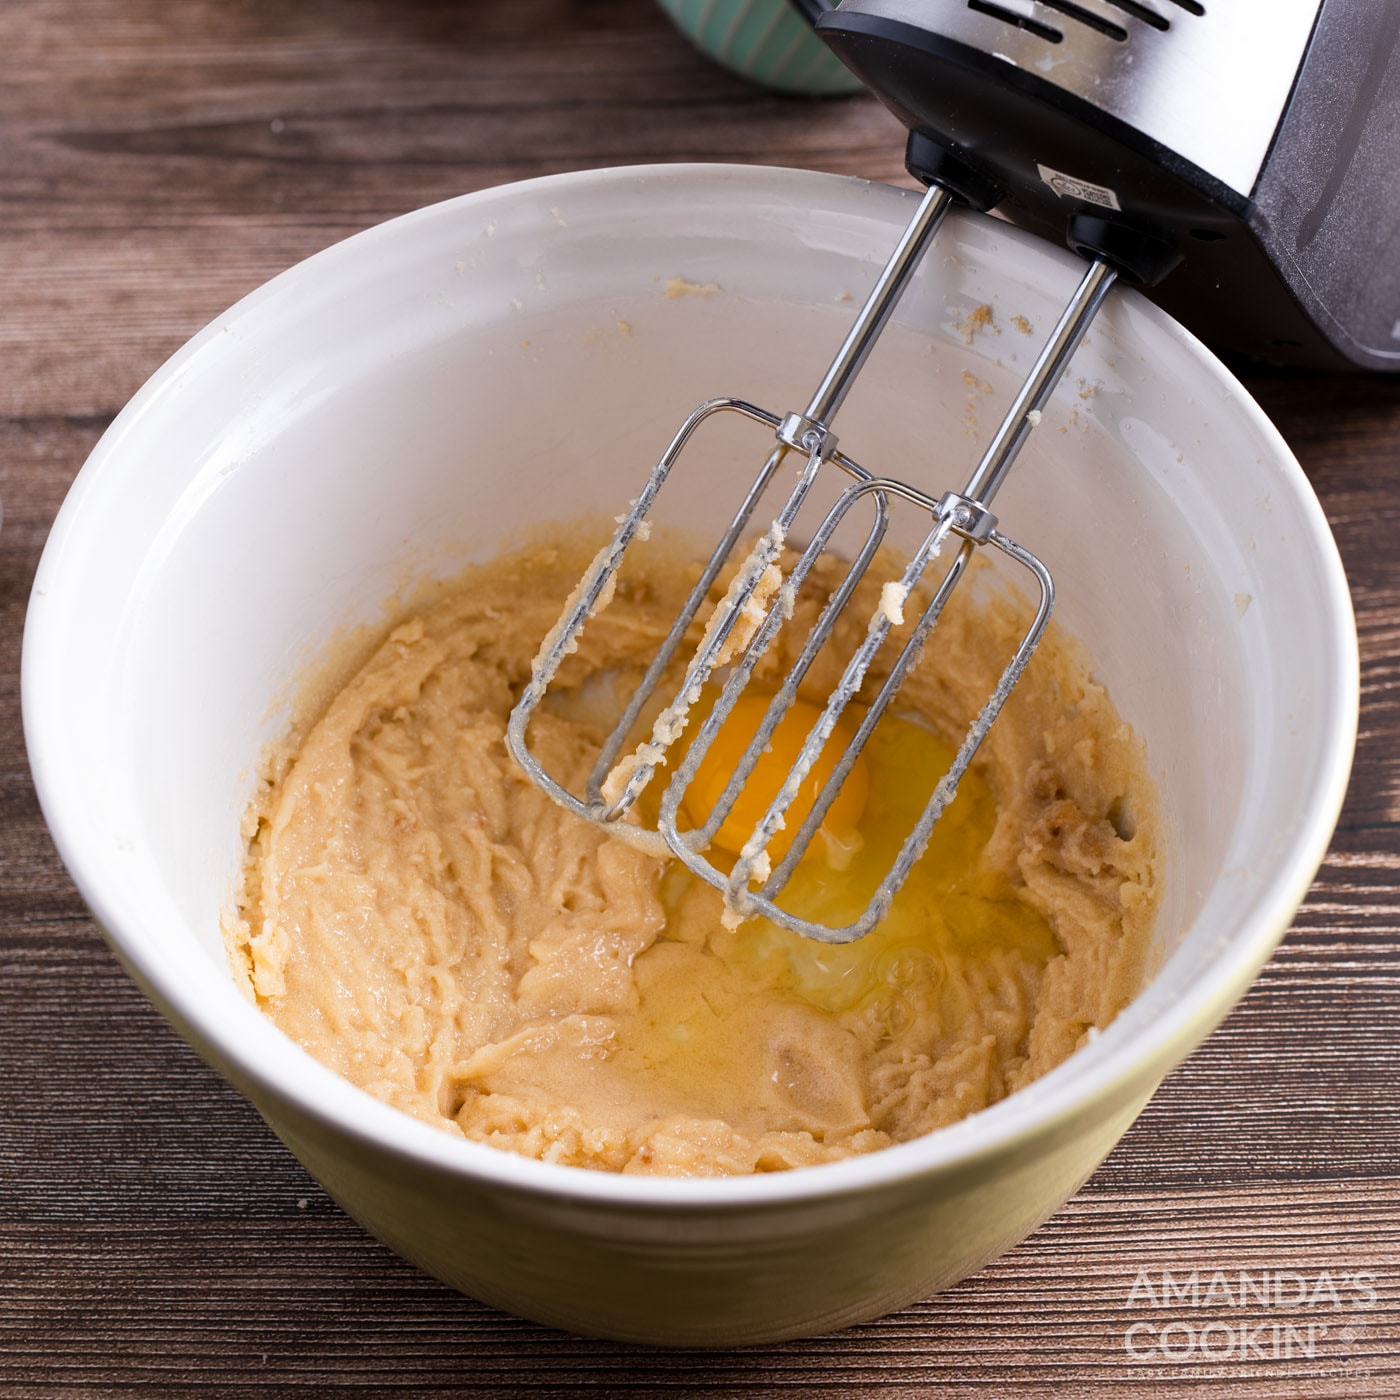 butter, brown sugar, and granulated sugar in a mixing bowl with beater attachment